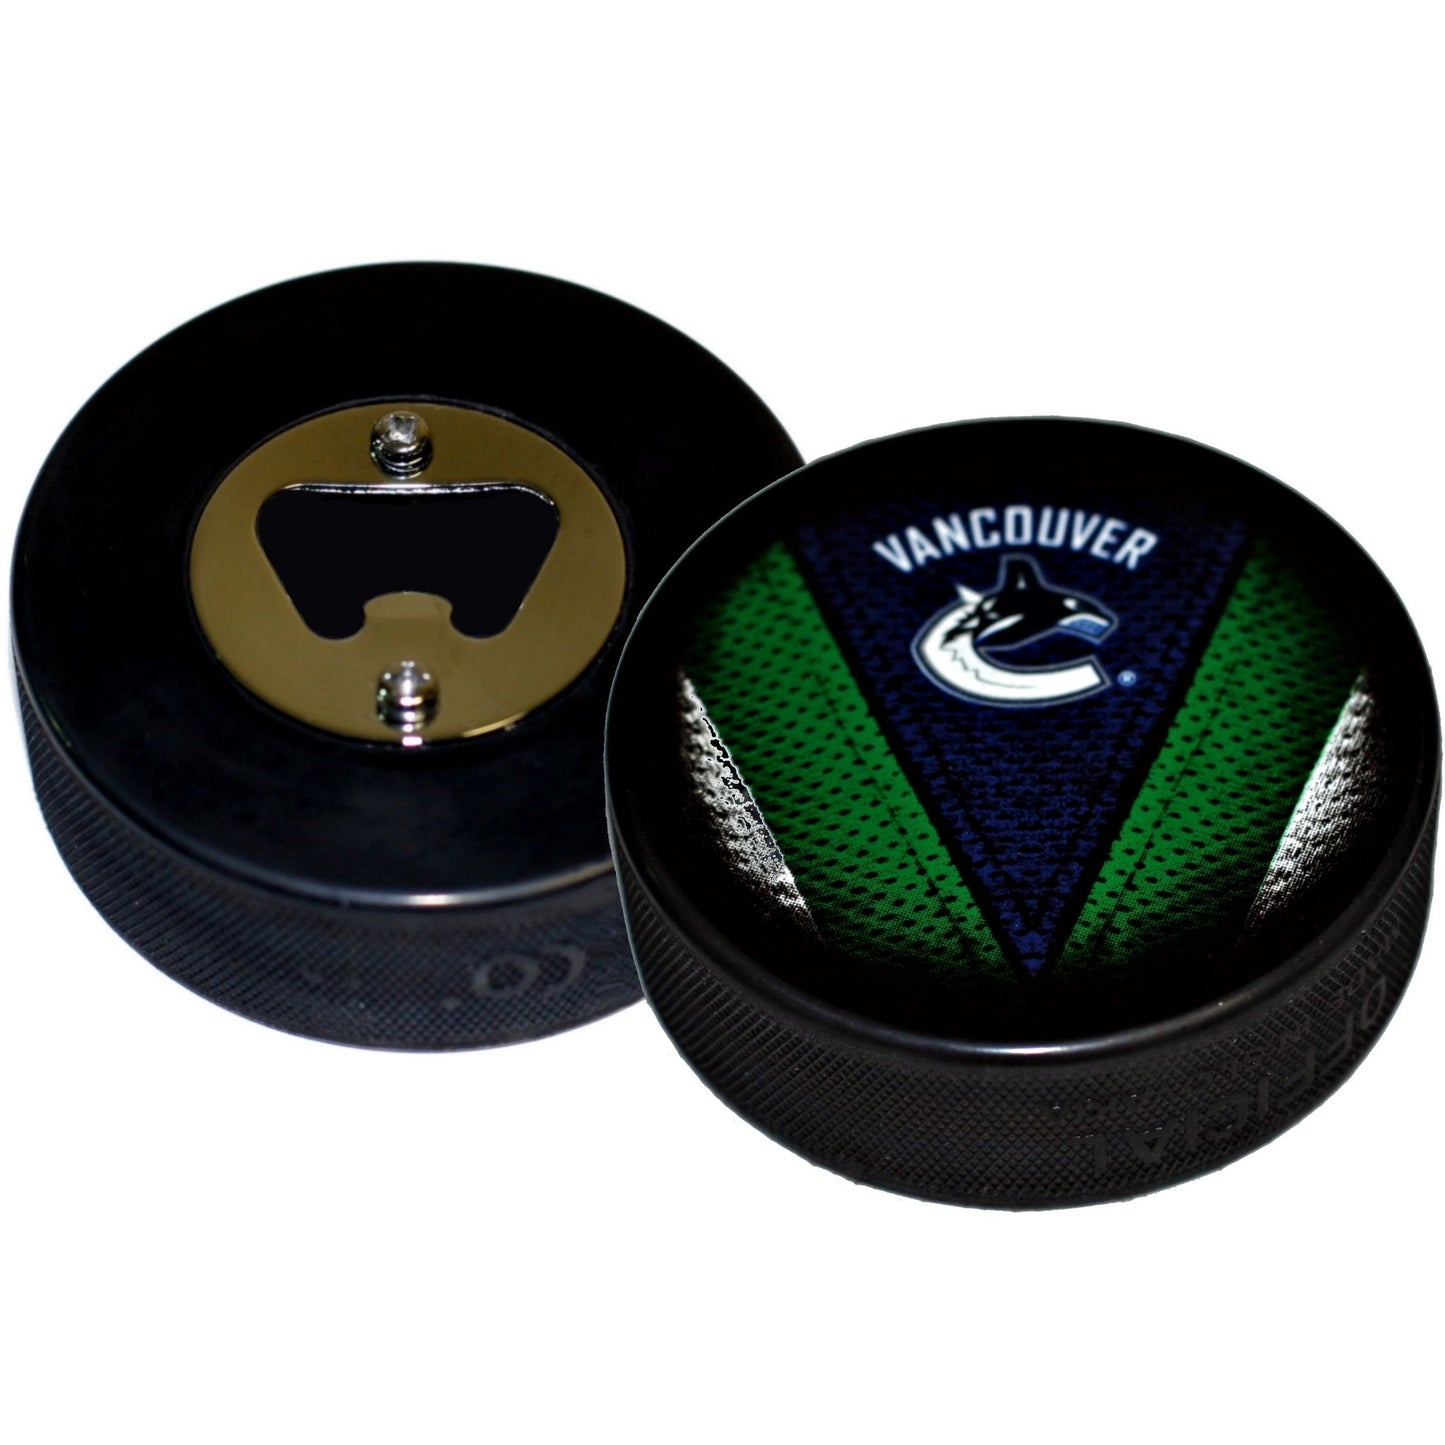 Vancouver Canucks Stitch Series Hockey Puck Bottle Opener